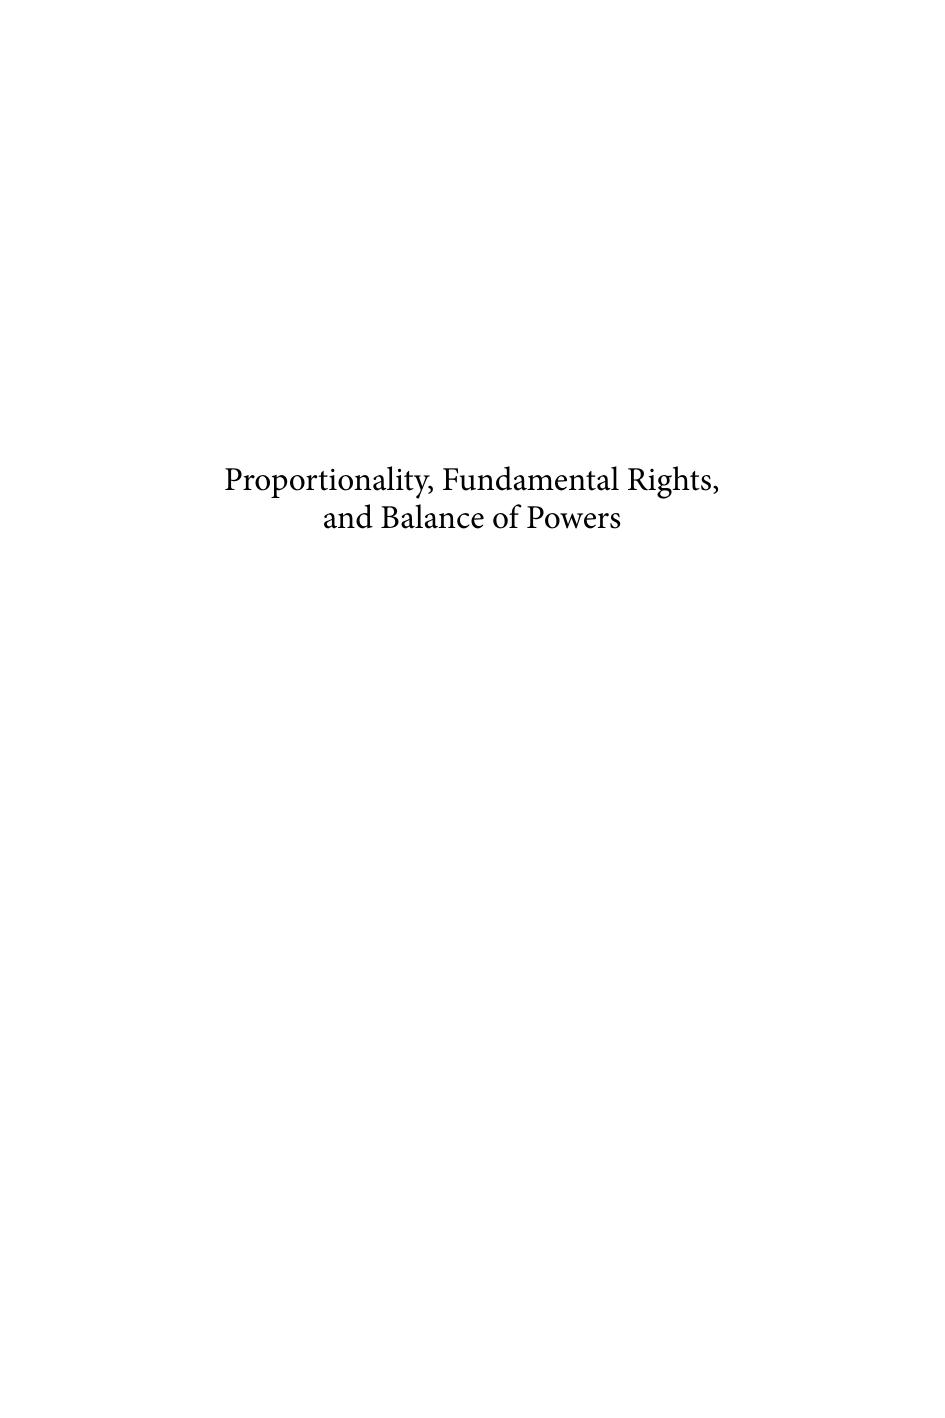 Proportionality, Fundamental Rights and Balance of Powers by Davor Susnjar